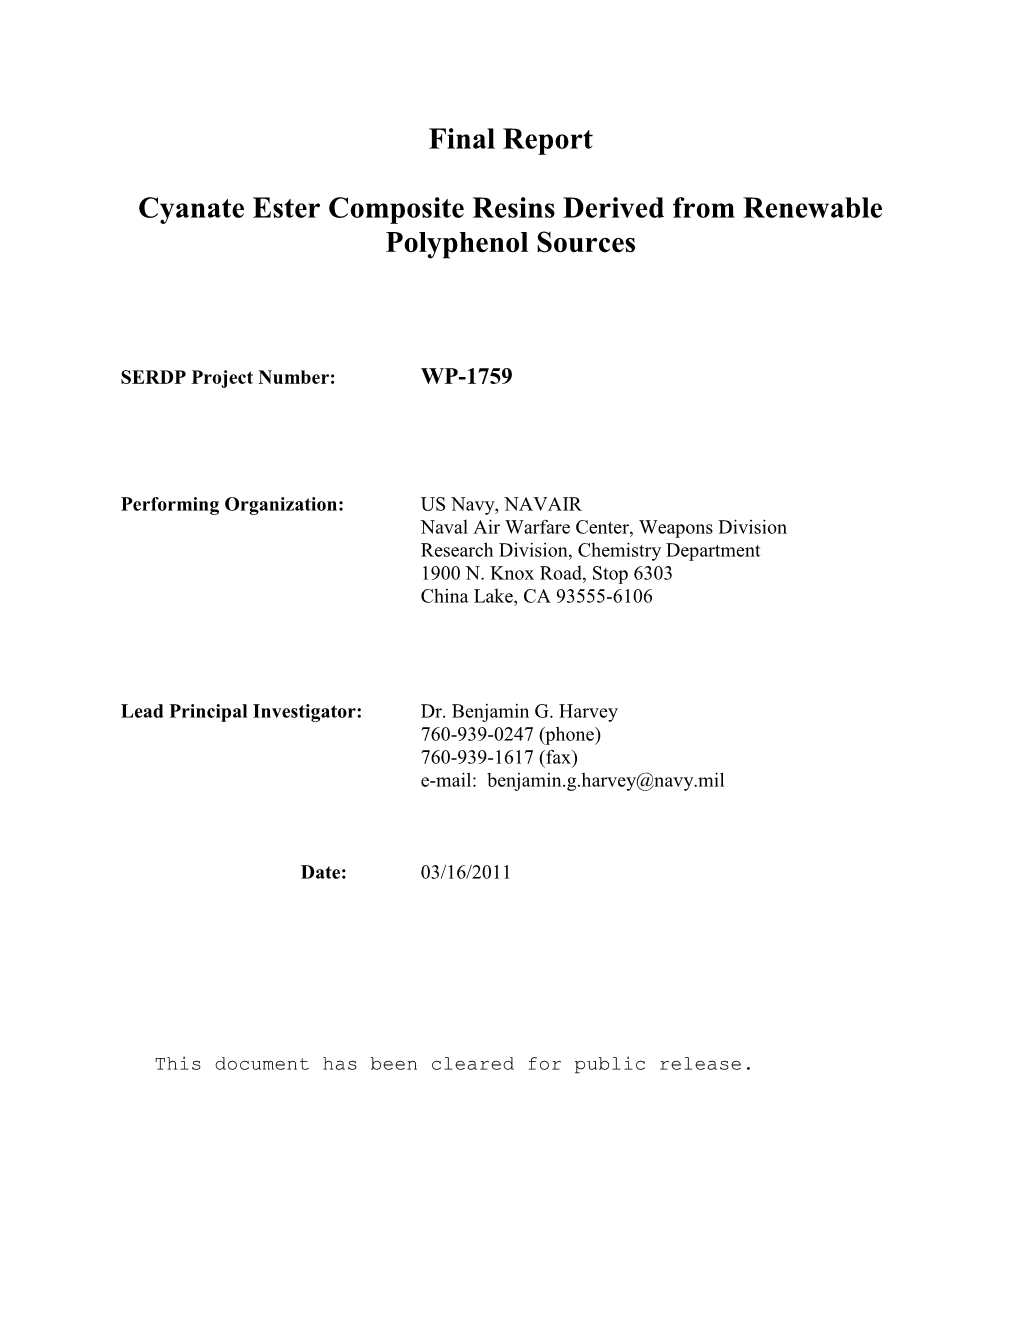 Final Report Cyanate Ester Composite Resins Derived from Renewable Polyphenol Sources